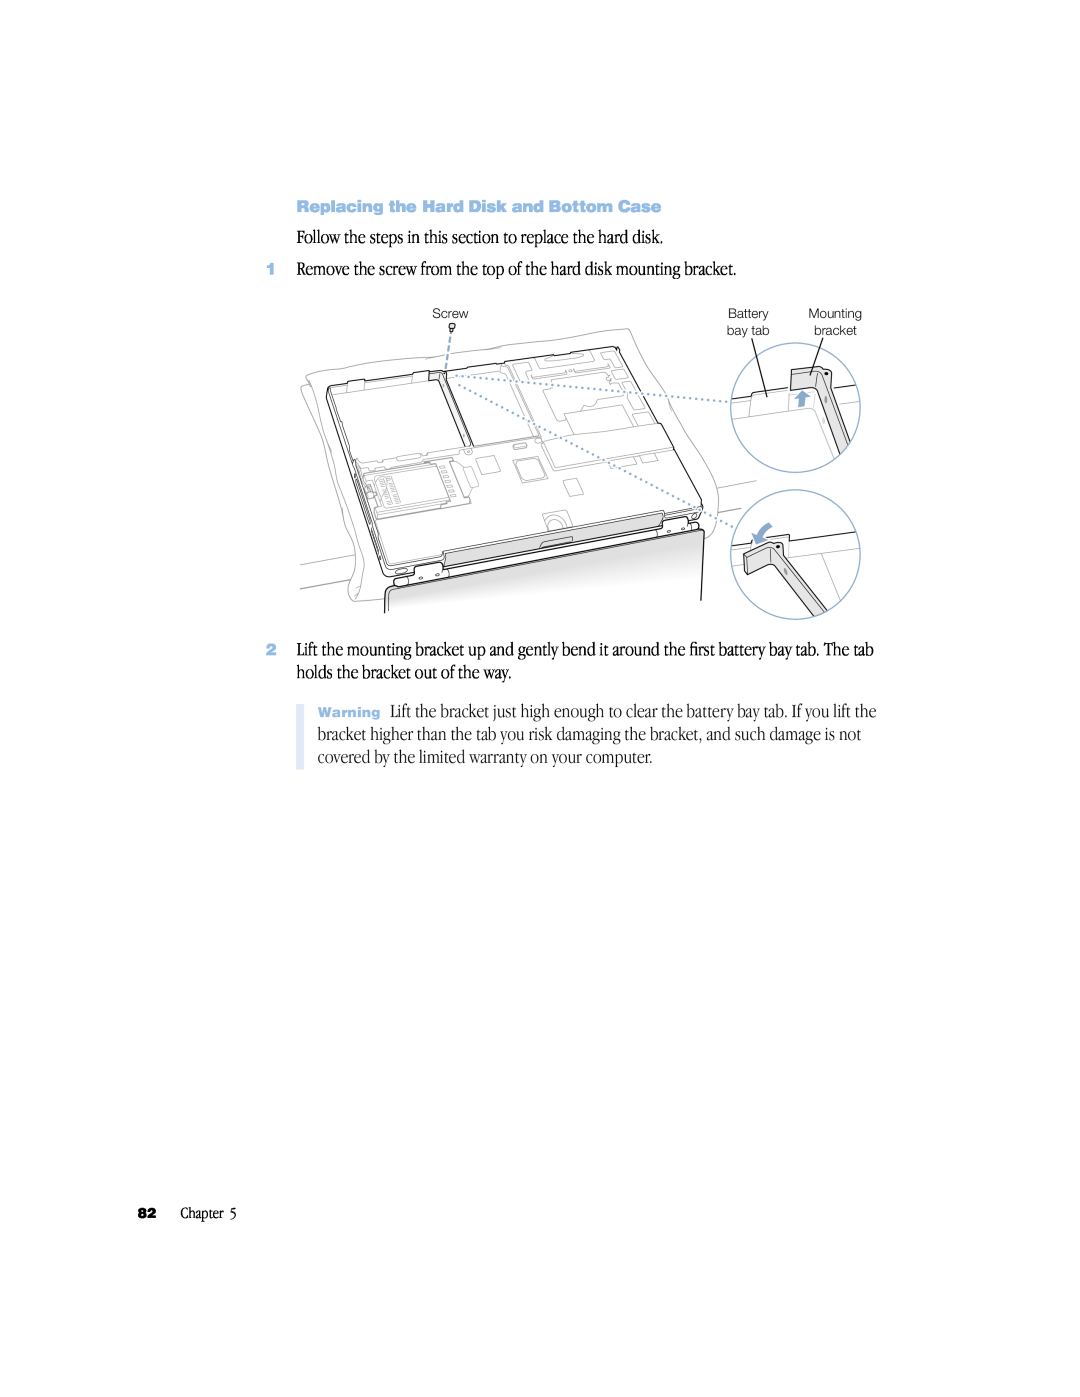 Apple powerbook g4 manual Follow the steps in this section to replace the hard disk 